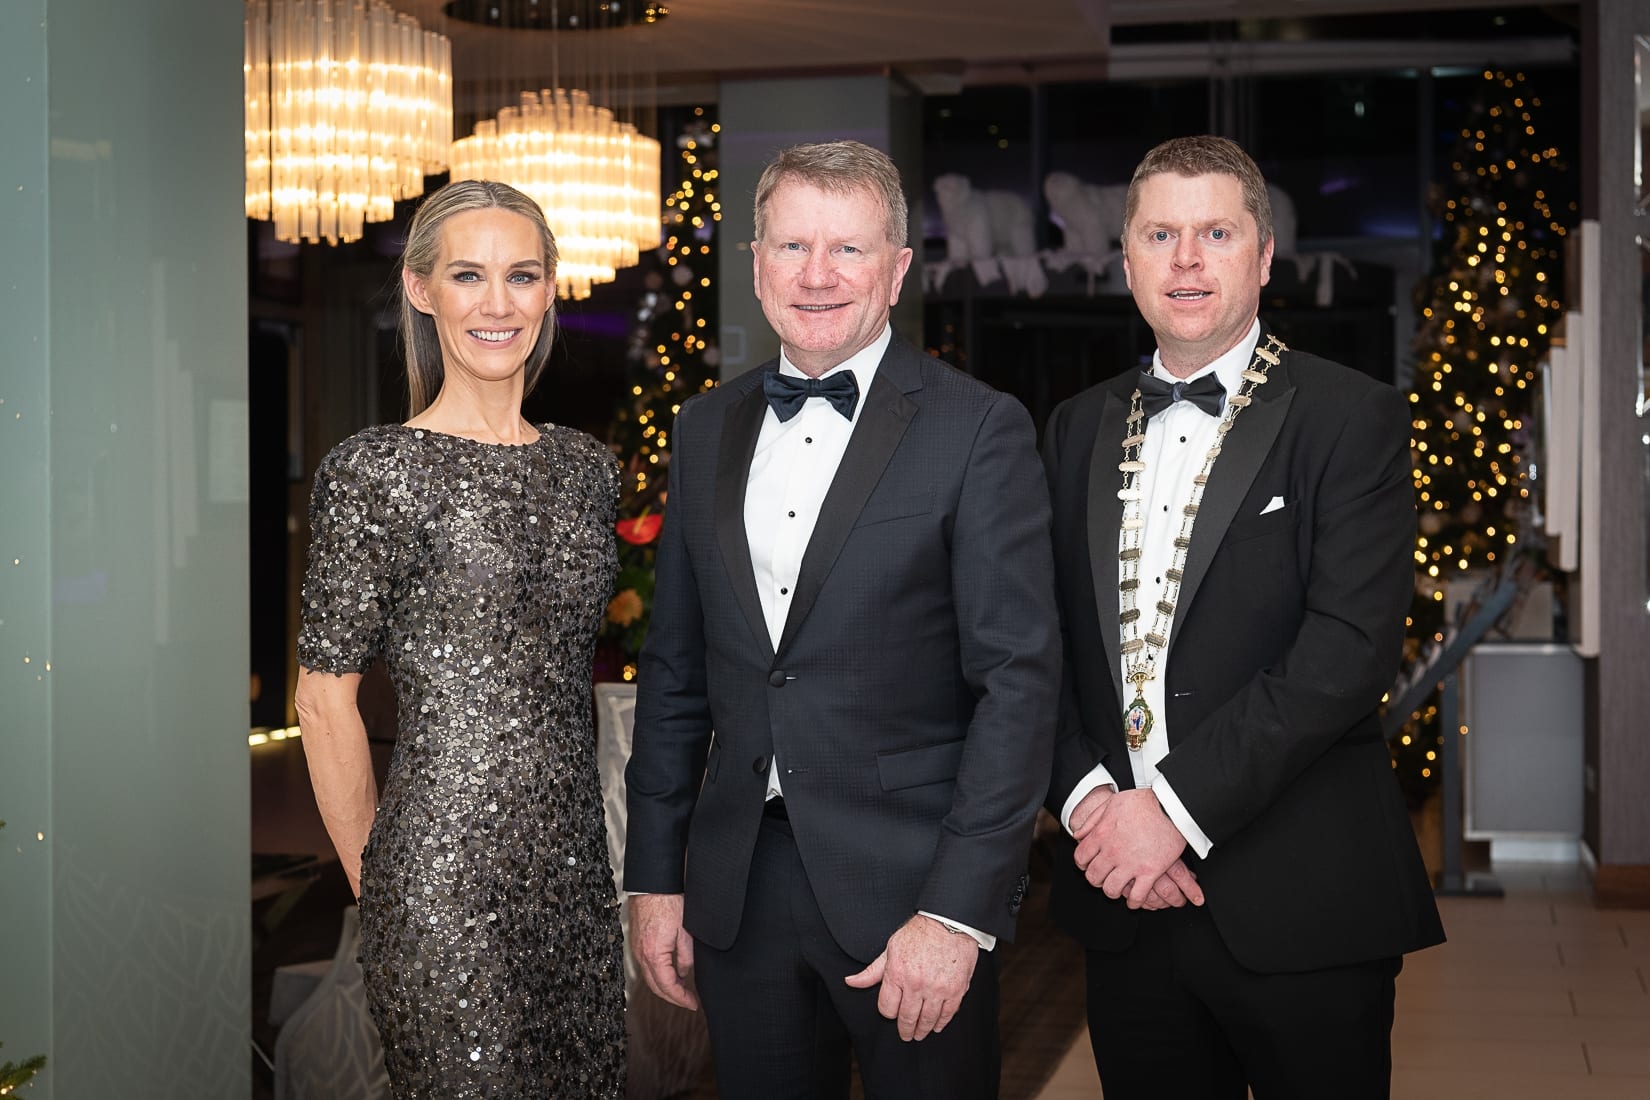 No repro fee-Limerick Chamber President’s Dinner
and Limerick Chamber Regional Business Awards 2019 which was held in the Strand Hotel on Friday 15th November /President Award/  - From Left to Right: Dee Ryan - CEO Limerick Chamber, Dr Hugh O’Donnell- WINNER / Ingenium Training and Consultancy, Eoin Ryan - President Limerick Chamber, 
Photo credit Shauna Kennedy